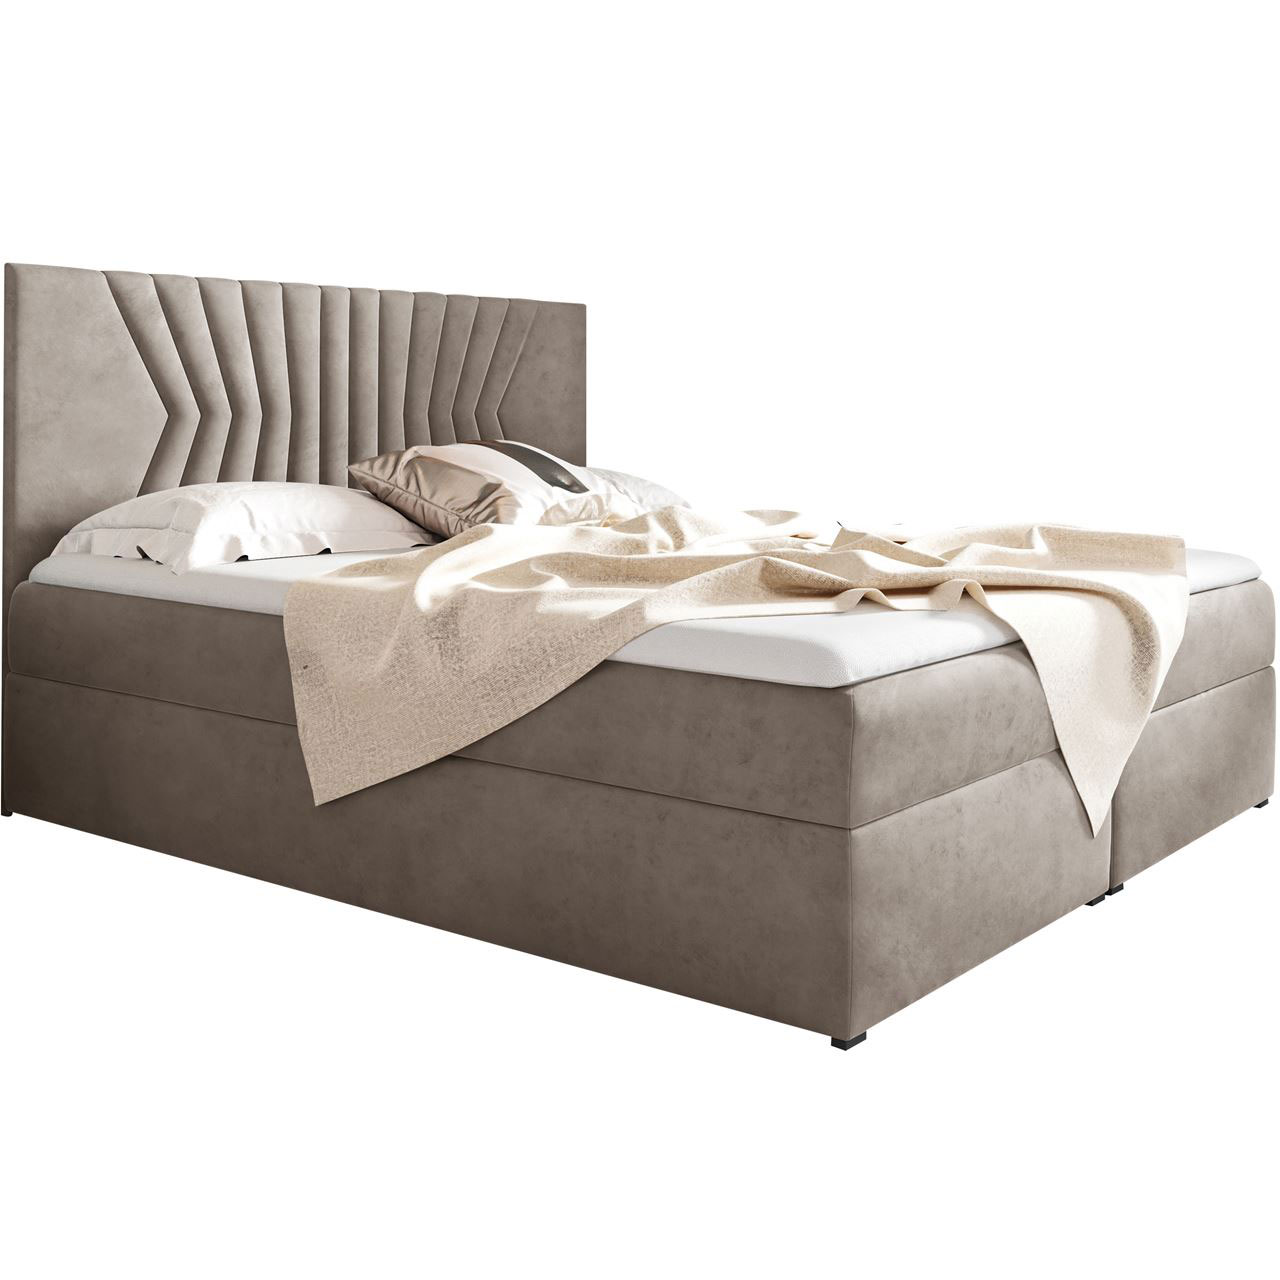 Upholstered bed ASTRO 120x200 fresh 02